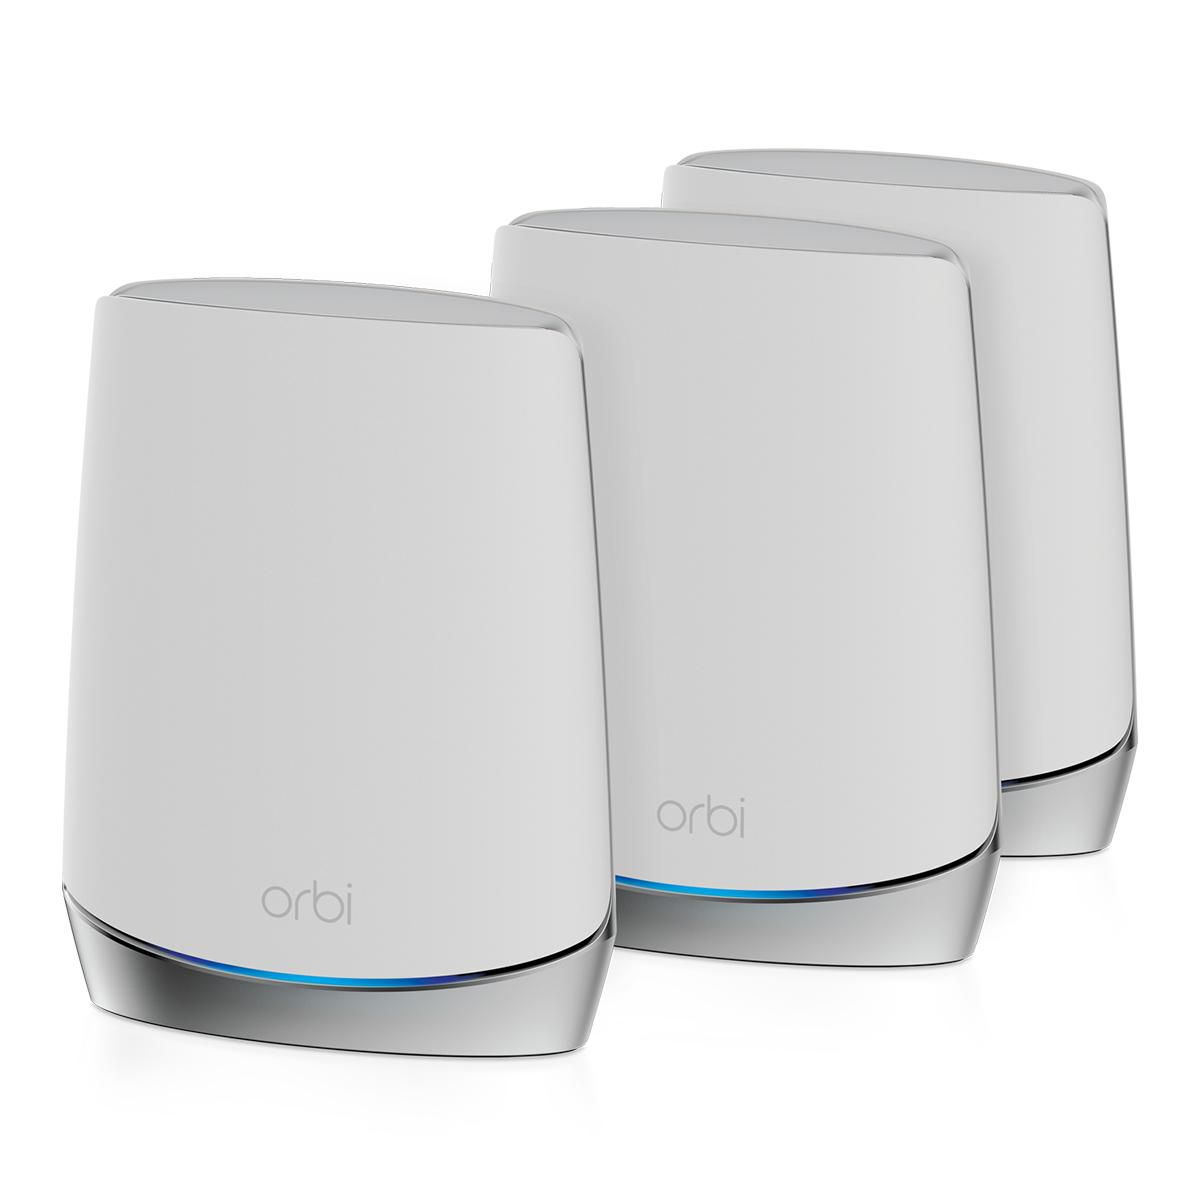 NETGEAR Orbi Whole Home Tri-Band Mesh WiFi 6 System AX4200 Router With 2 Satellite Extenders